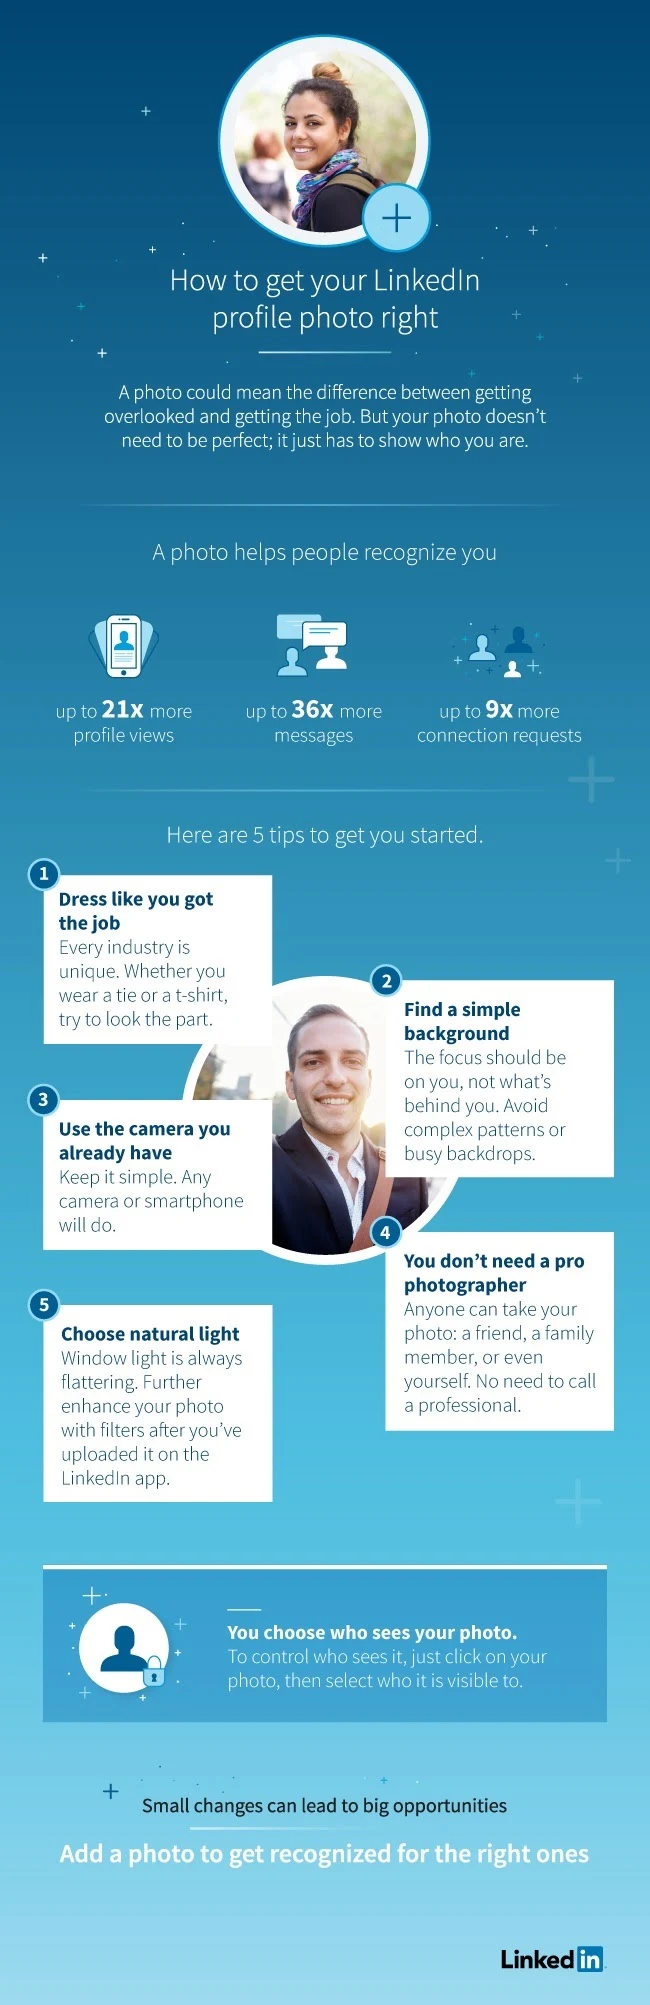 How to Get Your LinkedIn Profile Photo right - #infographic